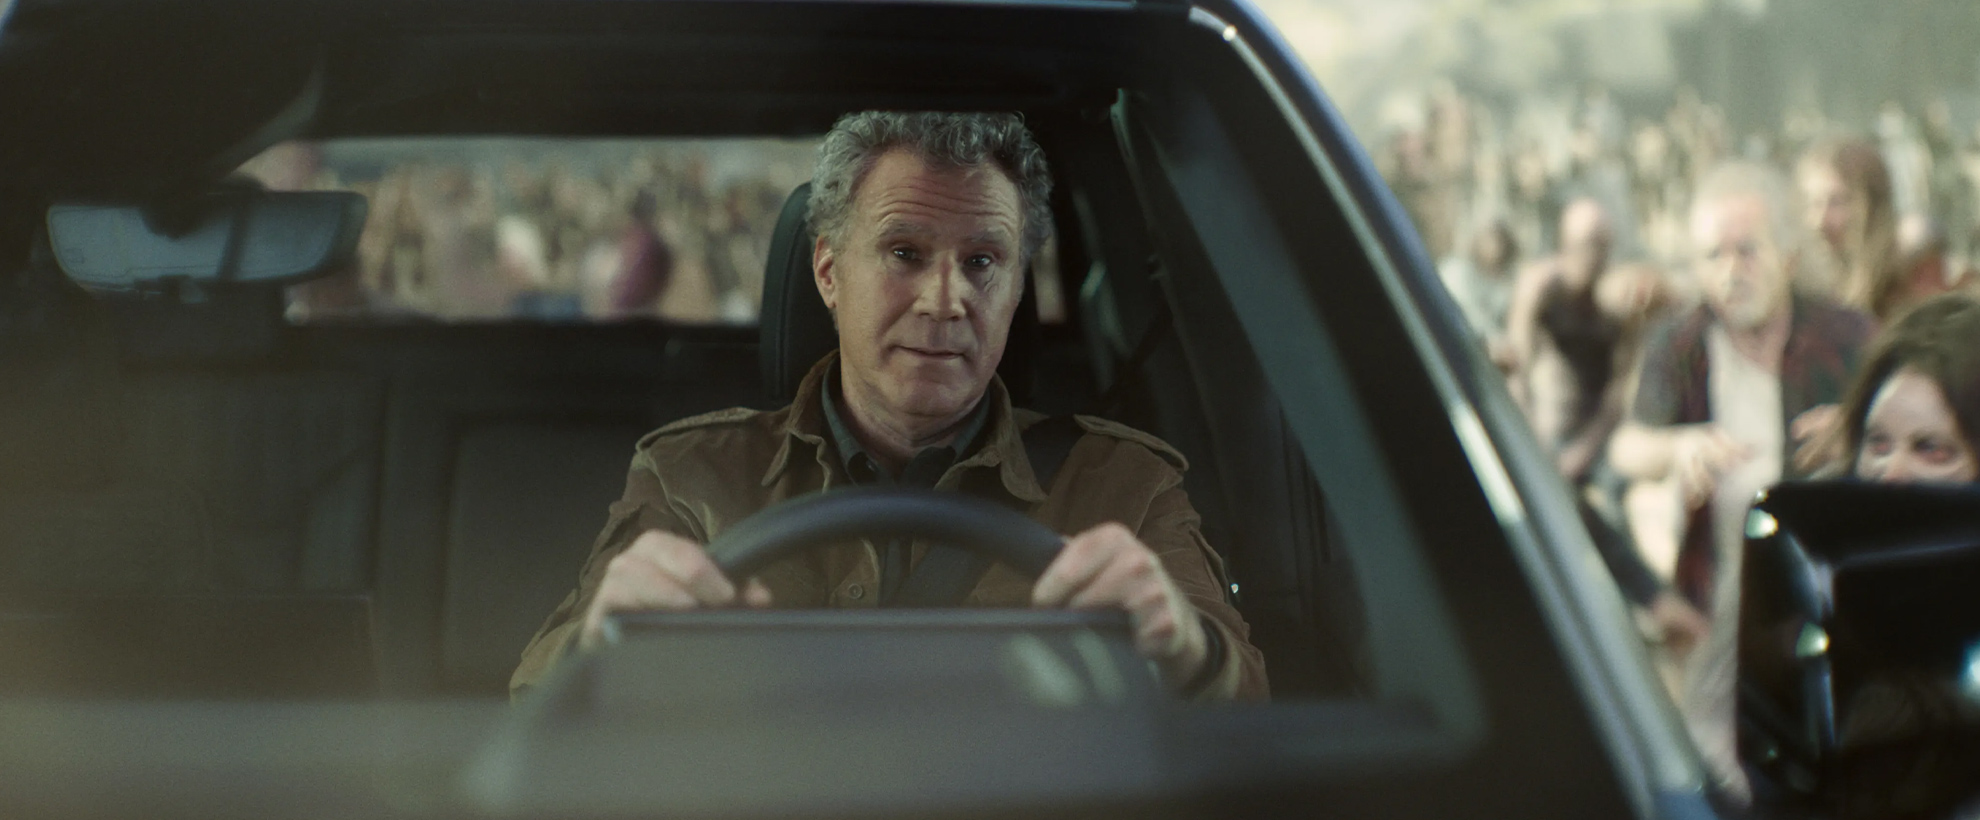 Will Ferrell drives an electric vehicle surrounded by zombies from Army of the Dead